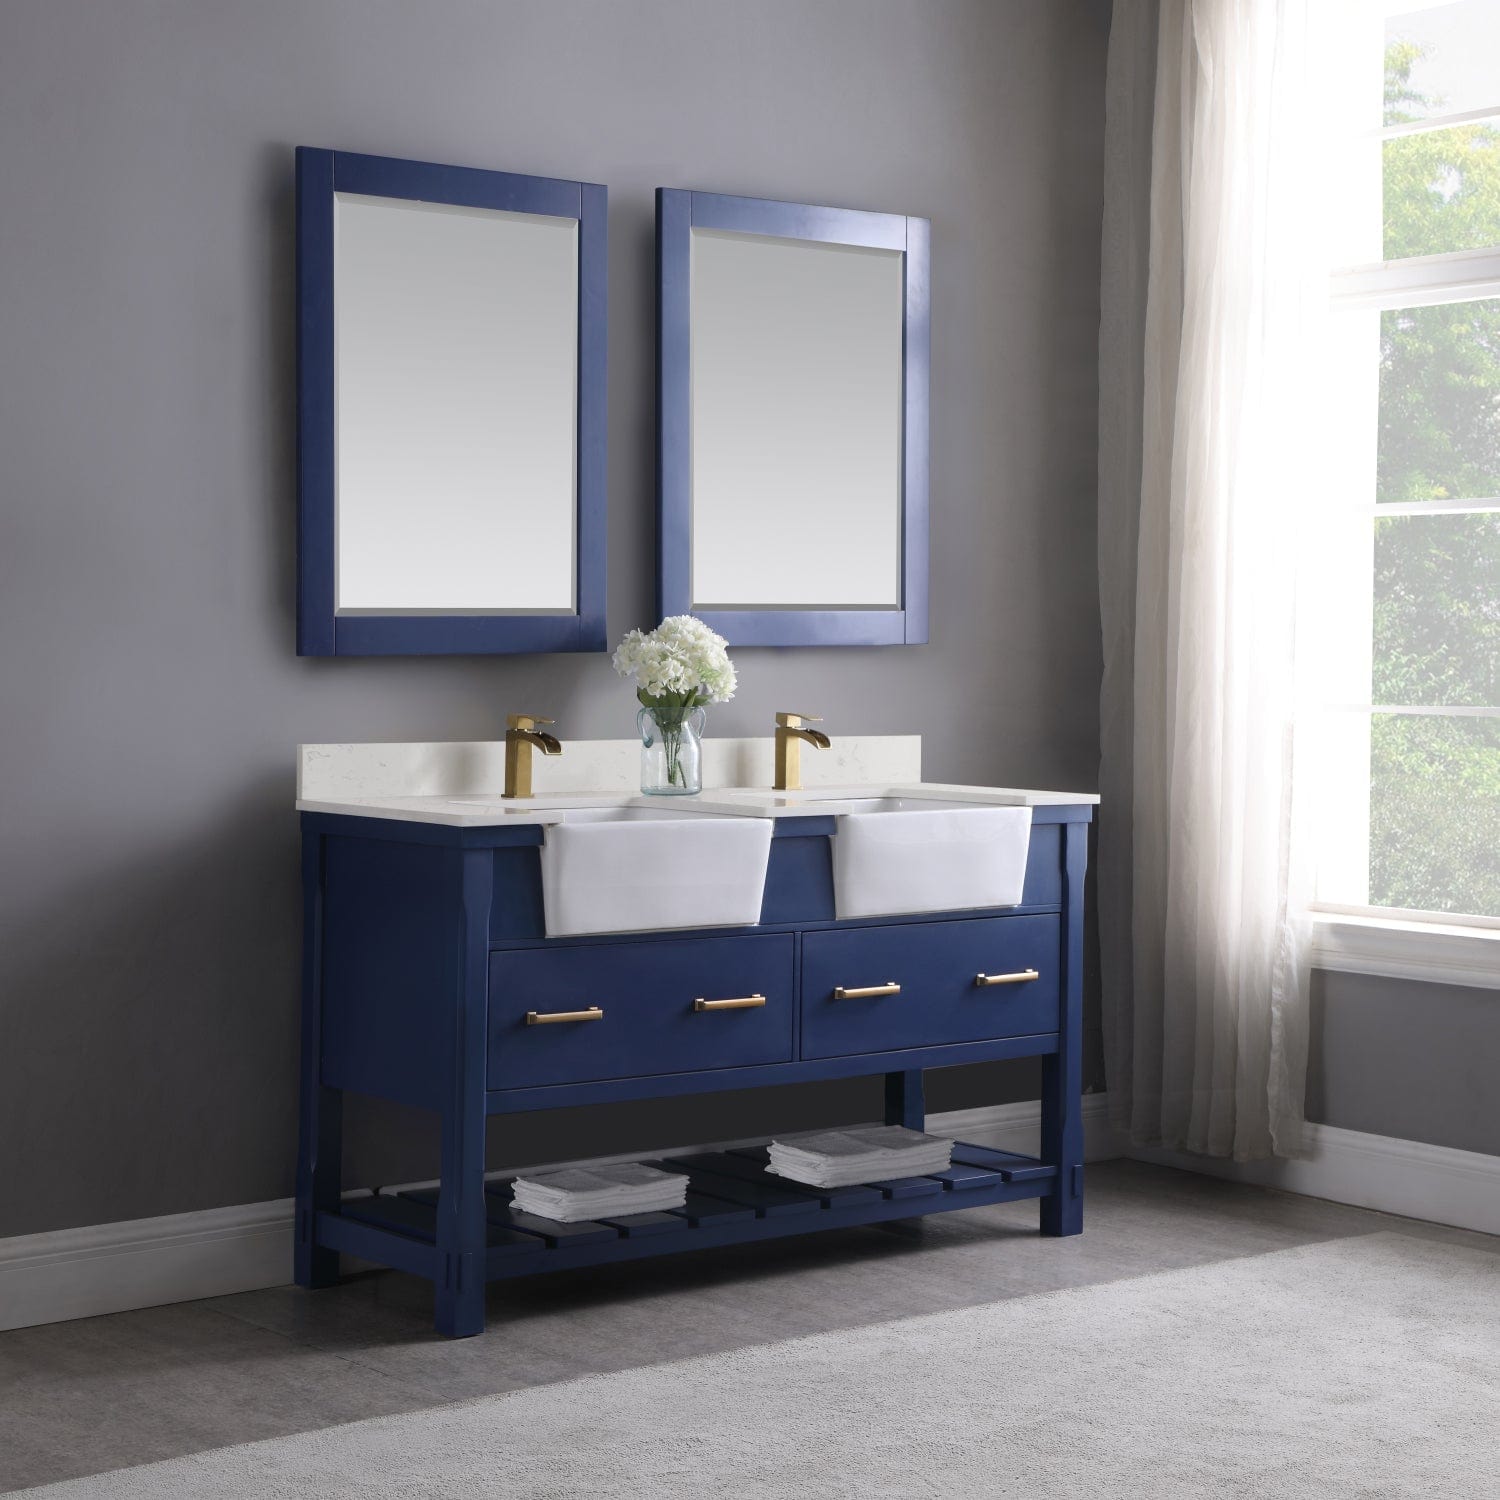 Altair Georgia 60" Double Bathroom Vanity Set in Jewelry Blue and Composite Carrara White Stone Top with White Farmhouse Basin with Mirror 537060-JB-AW - Molaix631112970631Vanity537060-JB-AW